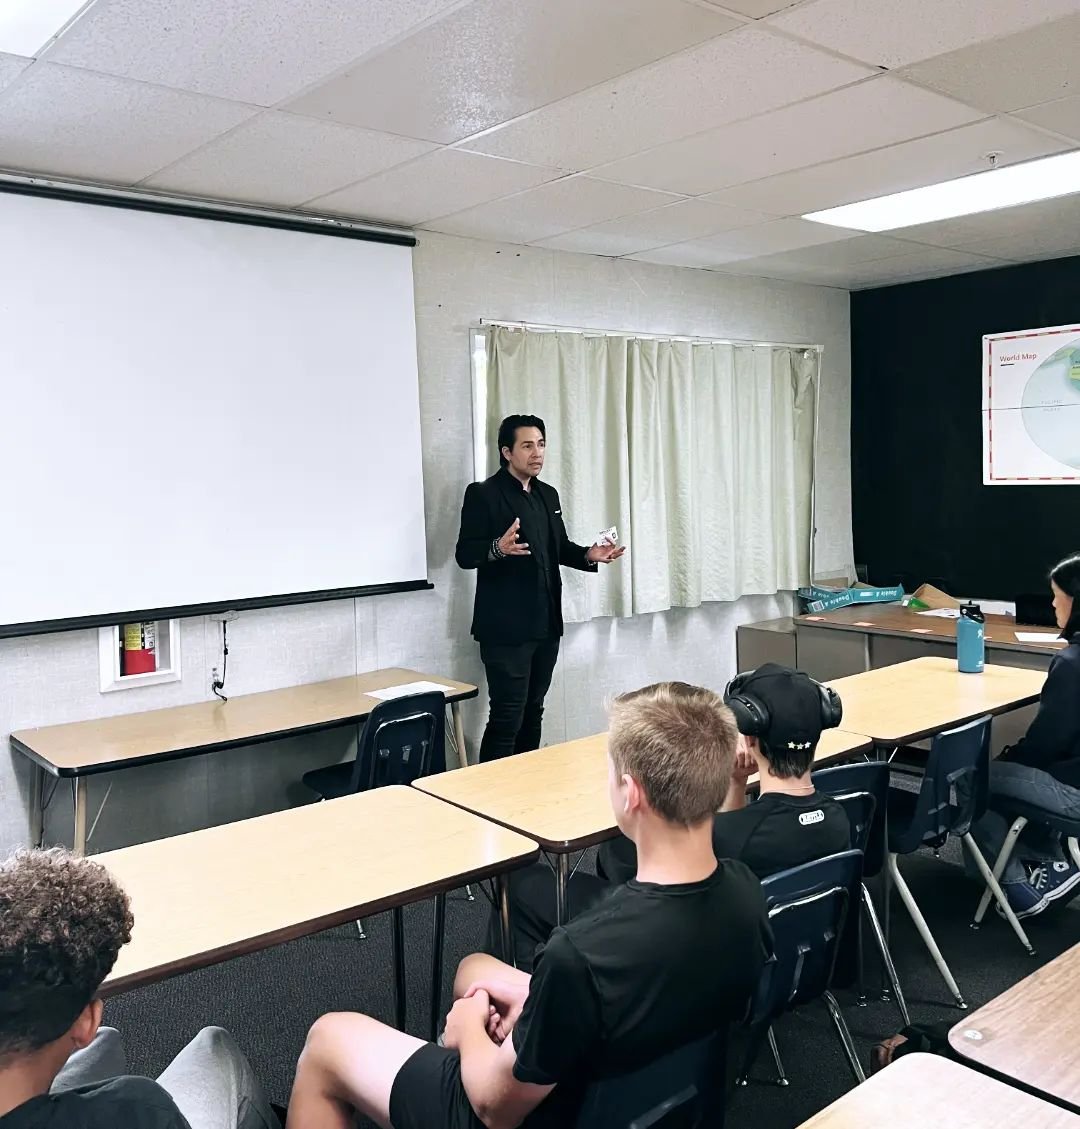 Teaching the next generation. Thank you @fnmspanthers for the time to give insight and mentor the next great generation of architects. I really enjoy mentoring. My mentors taught me so much. I honestly wouldn't be where I'm at today in my career with